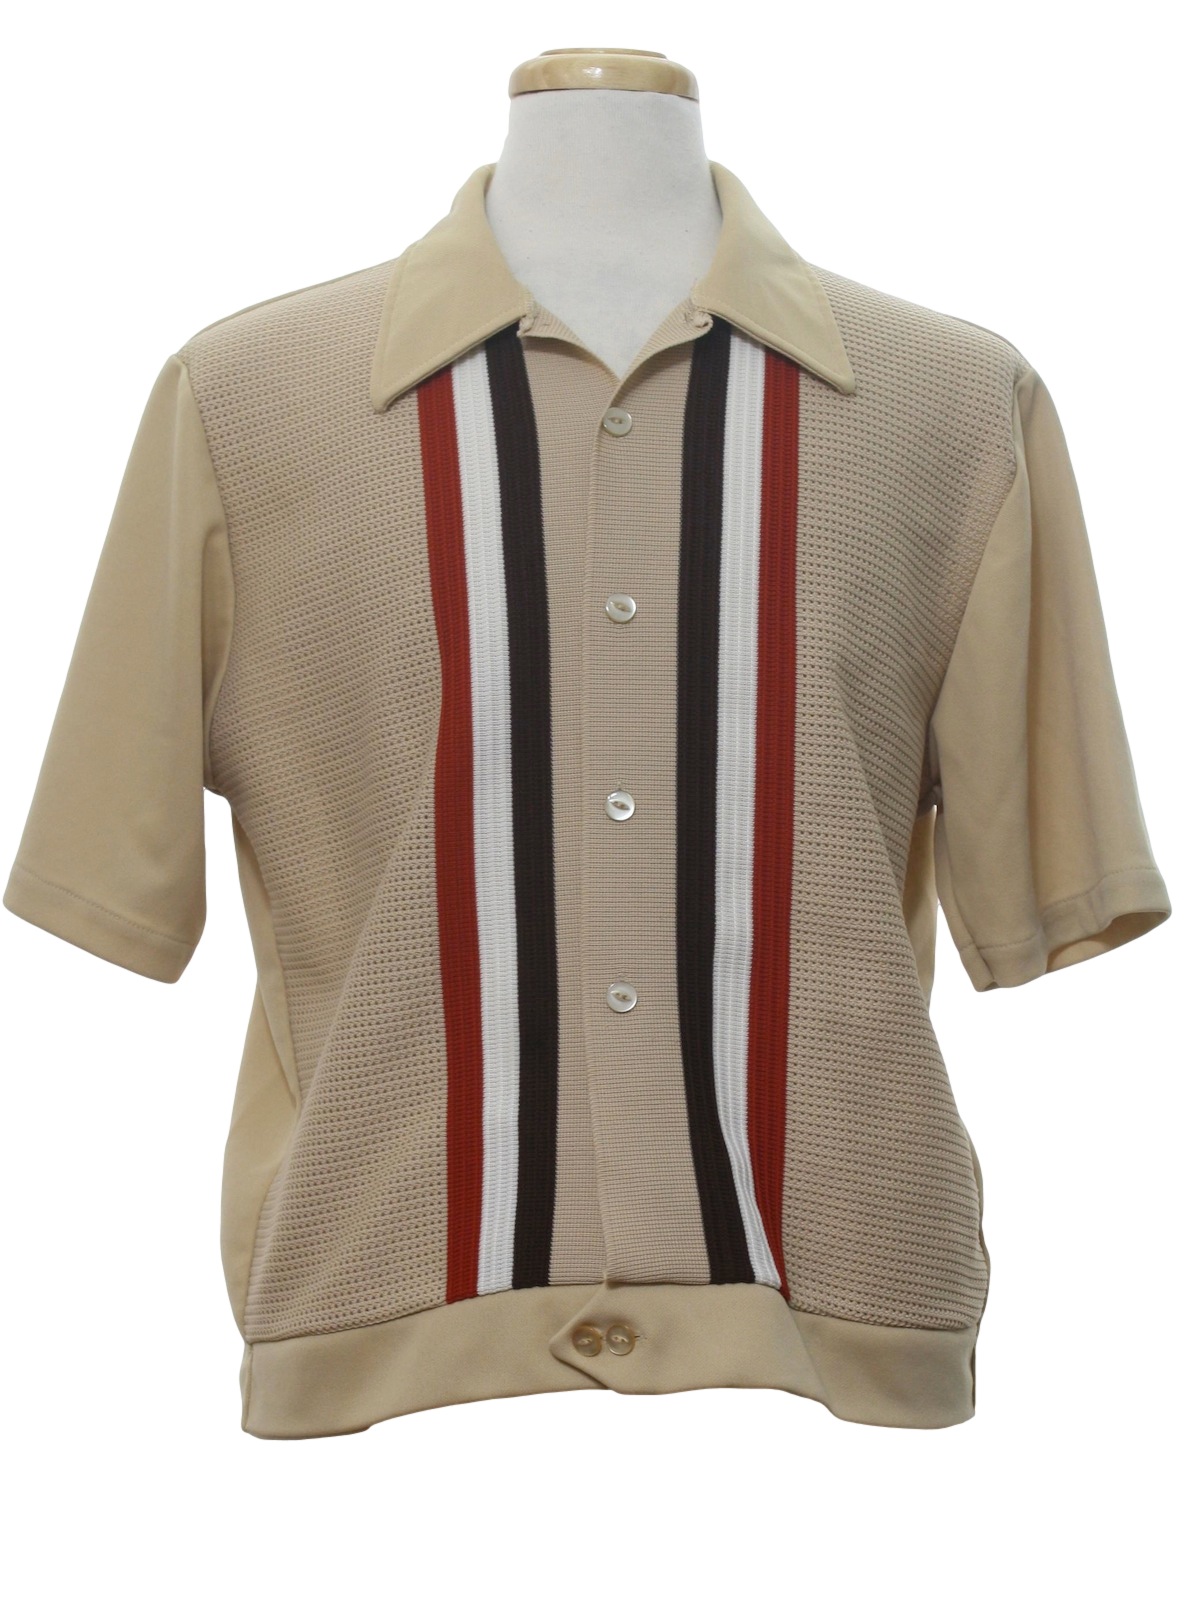 1970's Knit Shirt (Haband): 70s -Haband- Mens tan background with white ...